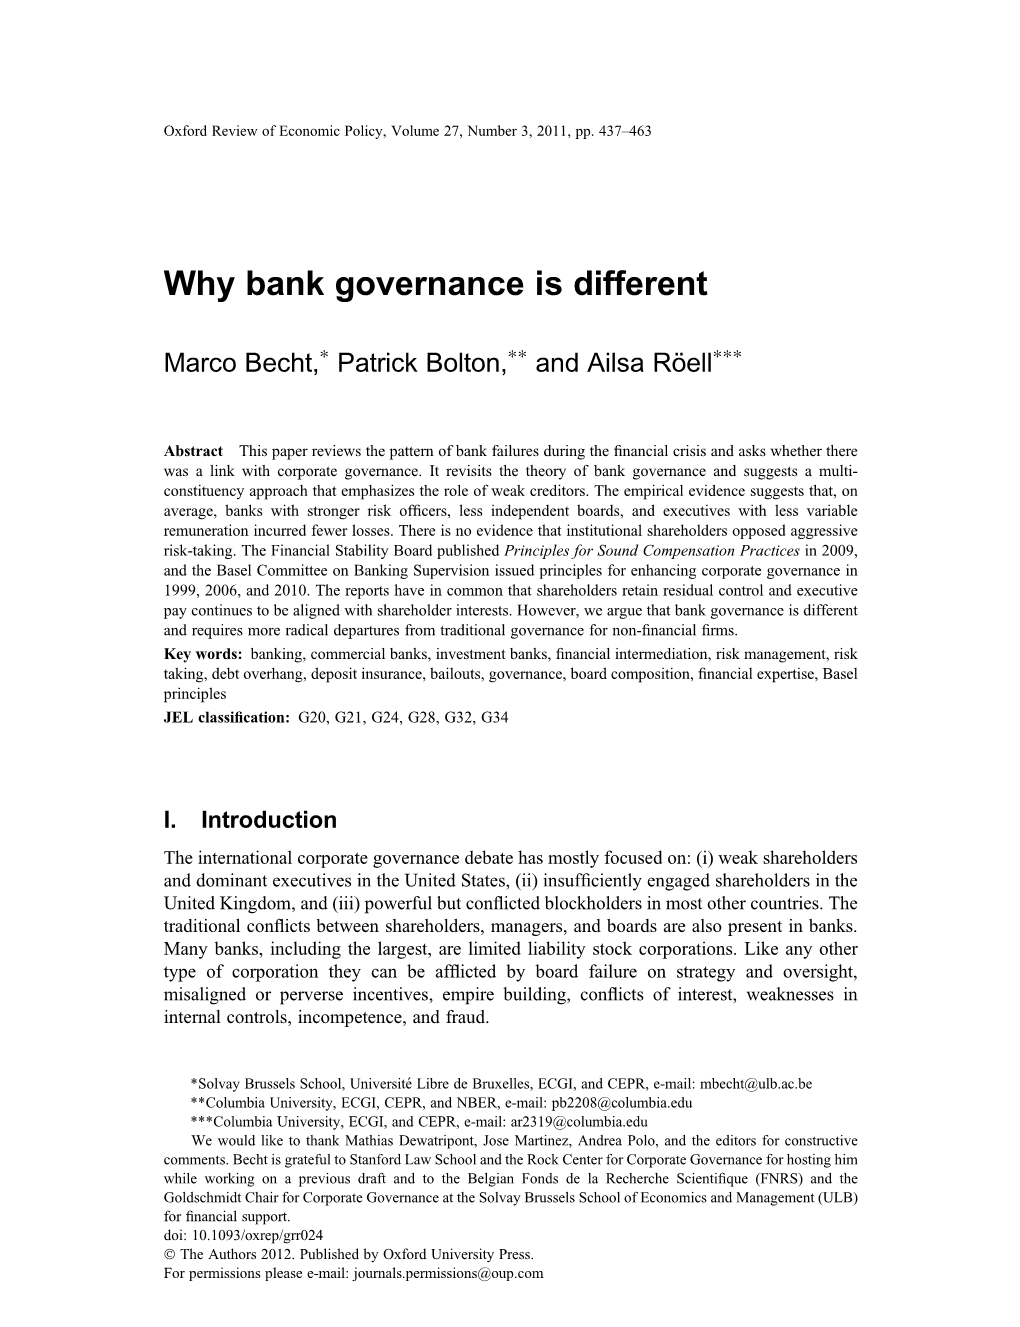 Why Bank Governance Is Different